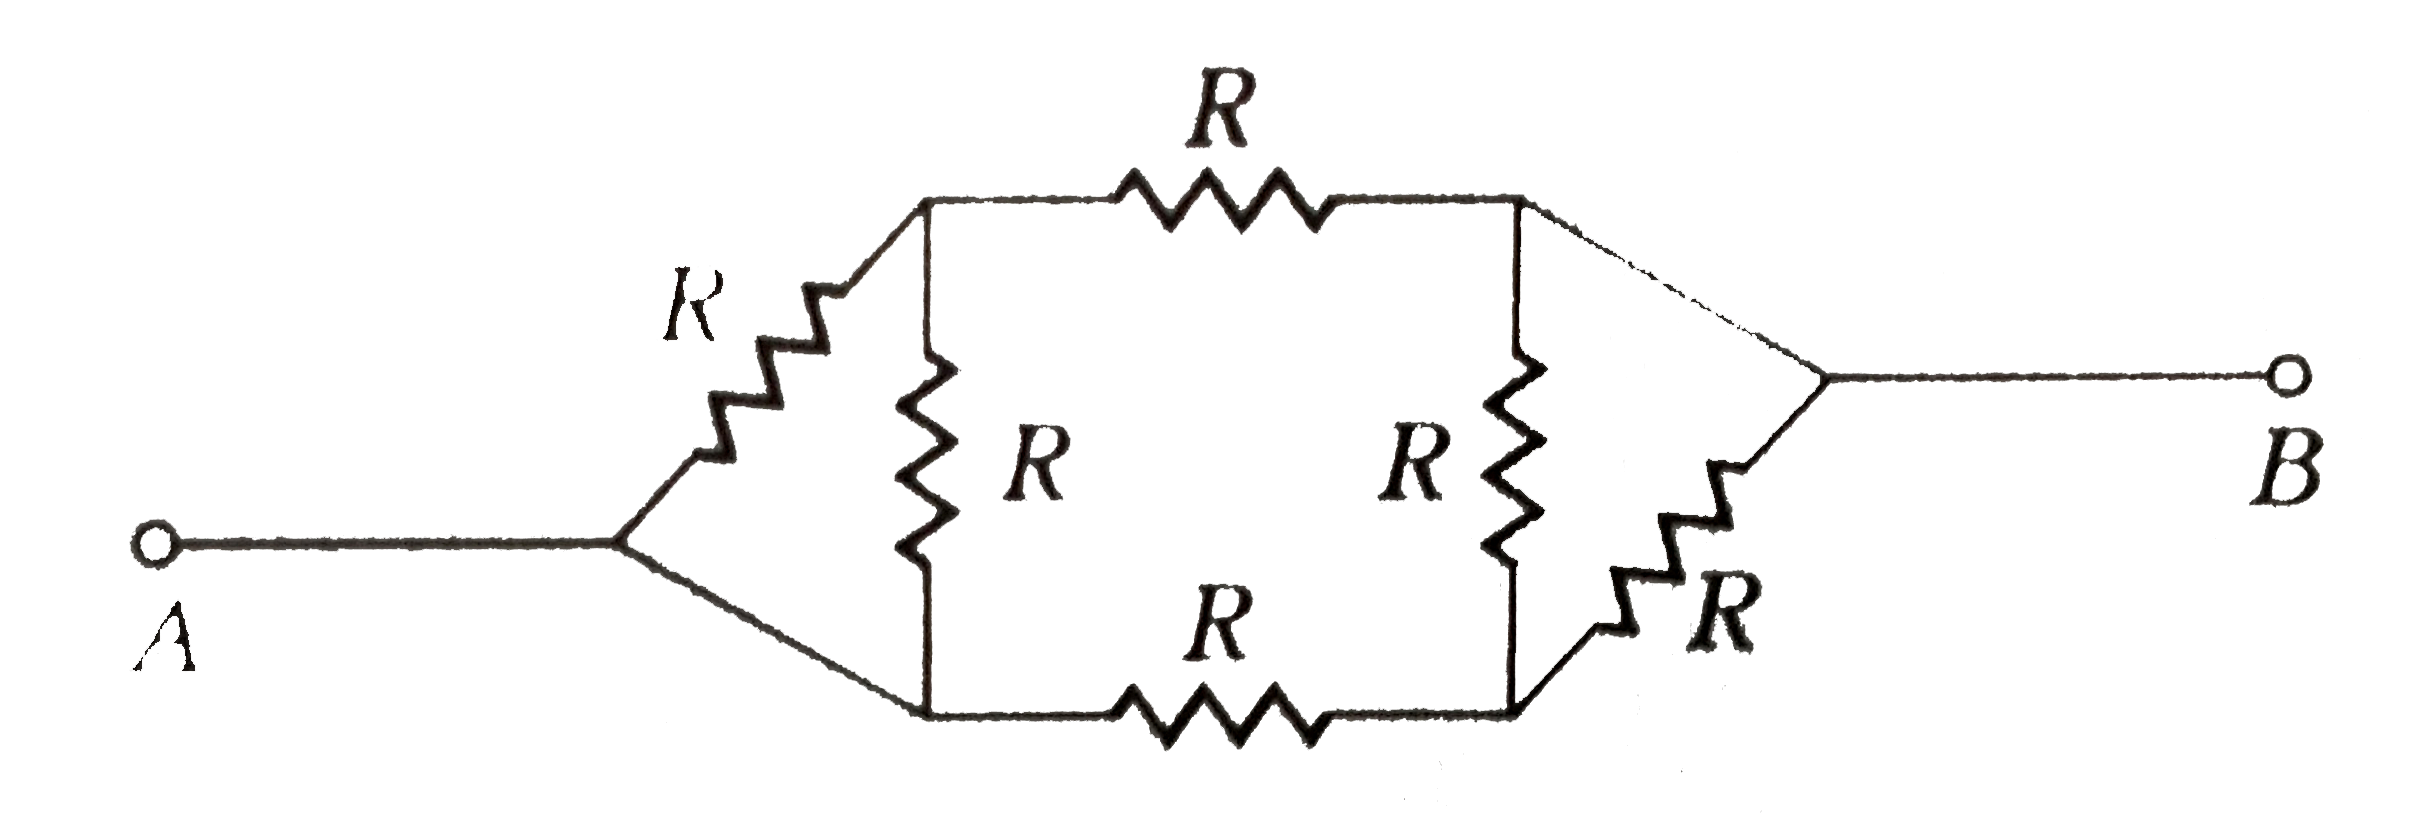 The equivalent resistance resistance between A and B of network shown in figure is